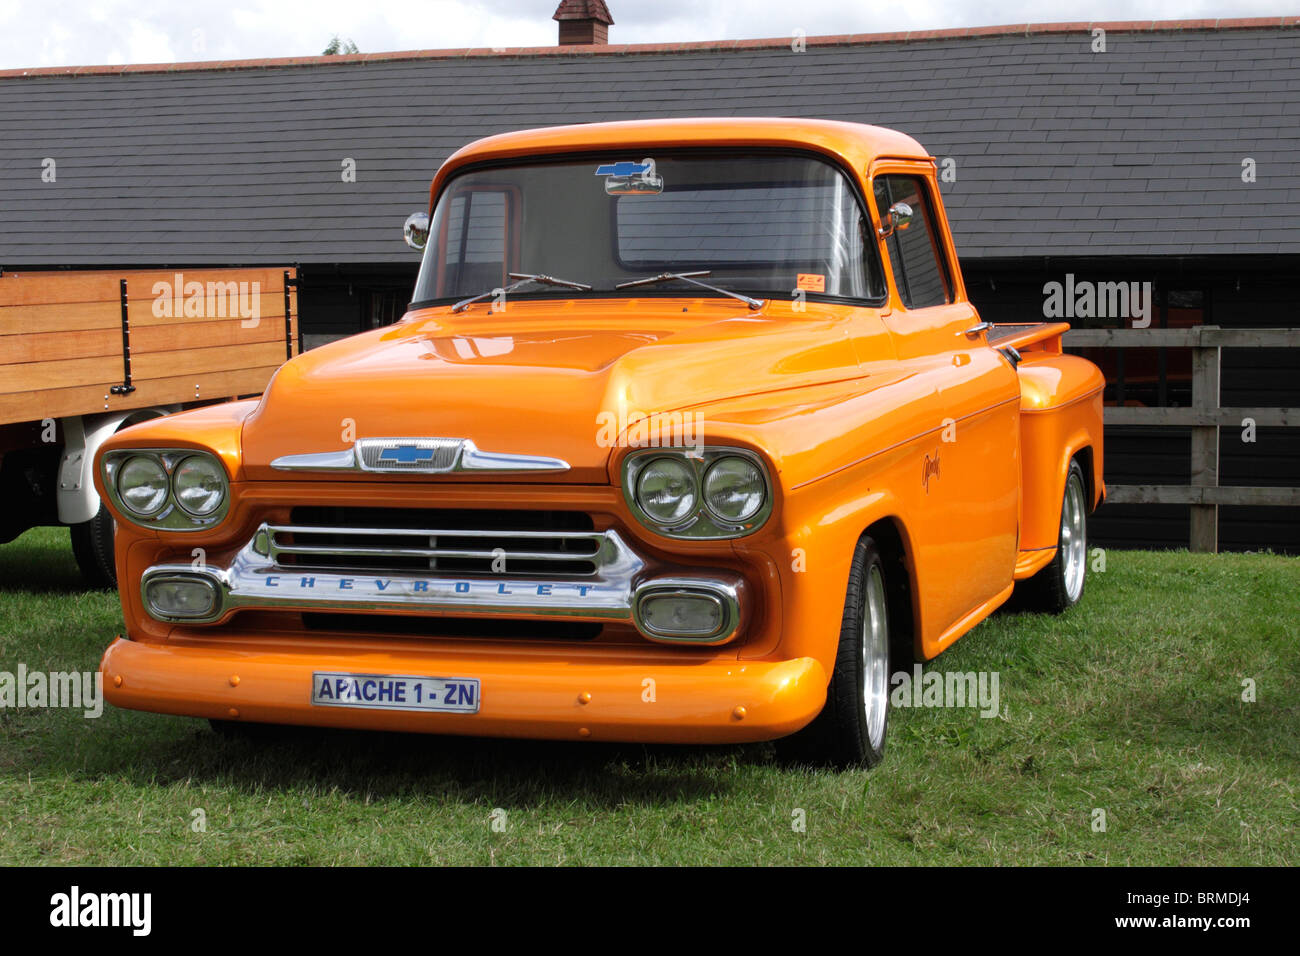 Chevrolet Apache pick up truck at Shire Horse Car Rally 2010 Stock Photo